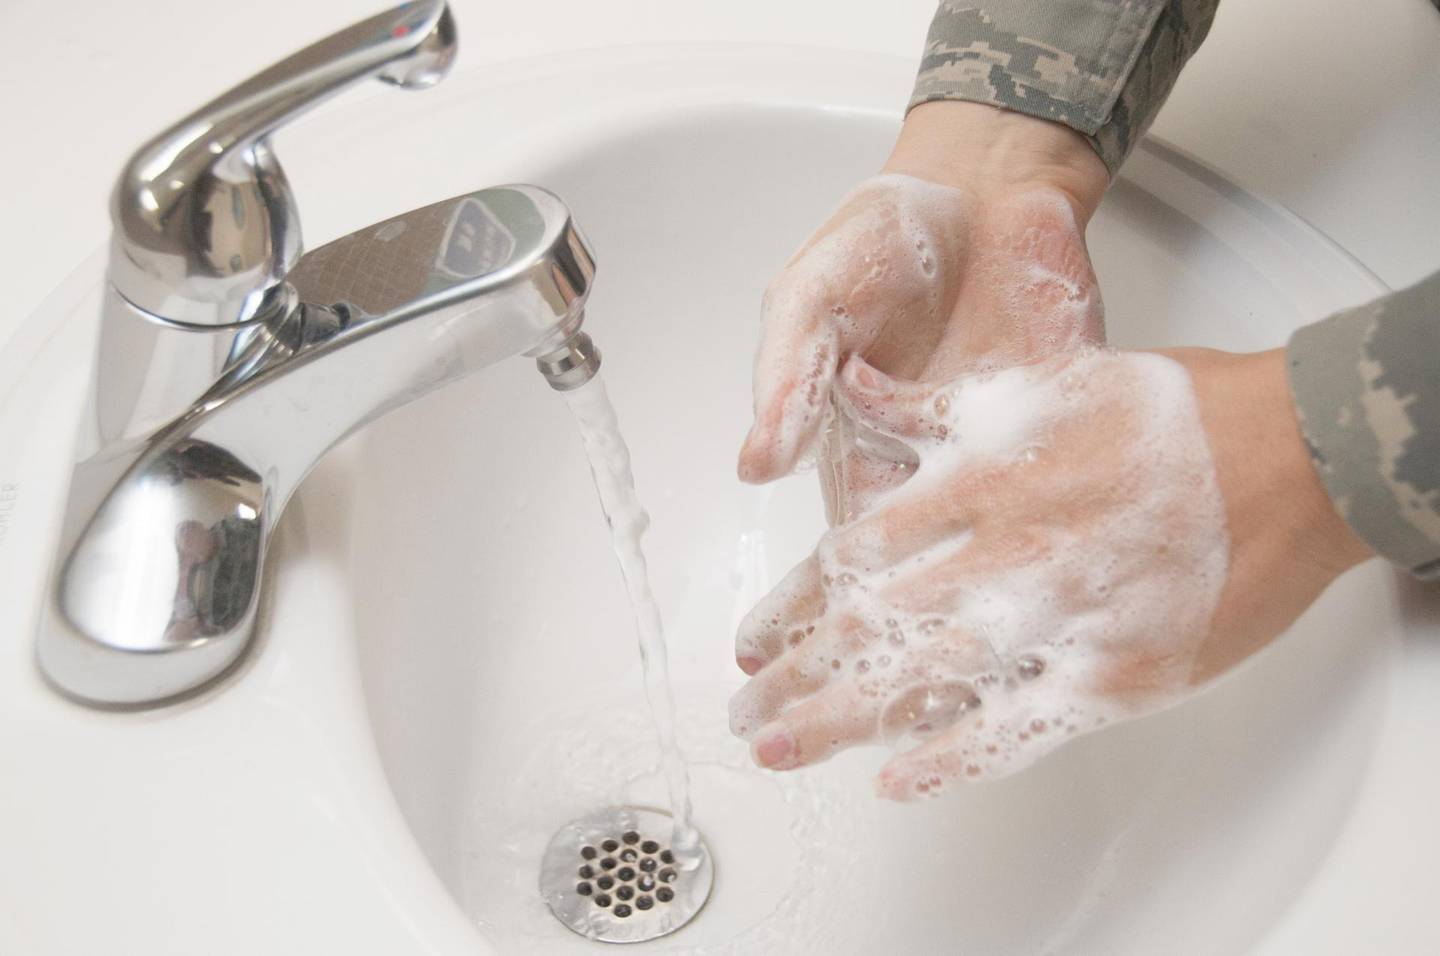 An Airman washes her hands with soap and water at Wilford Hall Ambulatory Surgical Center, Joint Base San Antonio Lackland, Texas Dec. 13, 2012. Hand washing is one of the most effective ways to prevent the spread of many types of infection and illness in all environments. (U.S. Air Force photo/Staff Sgt. Corey Hook)